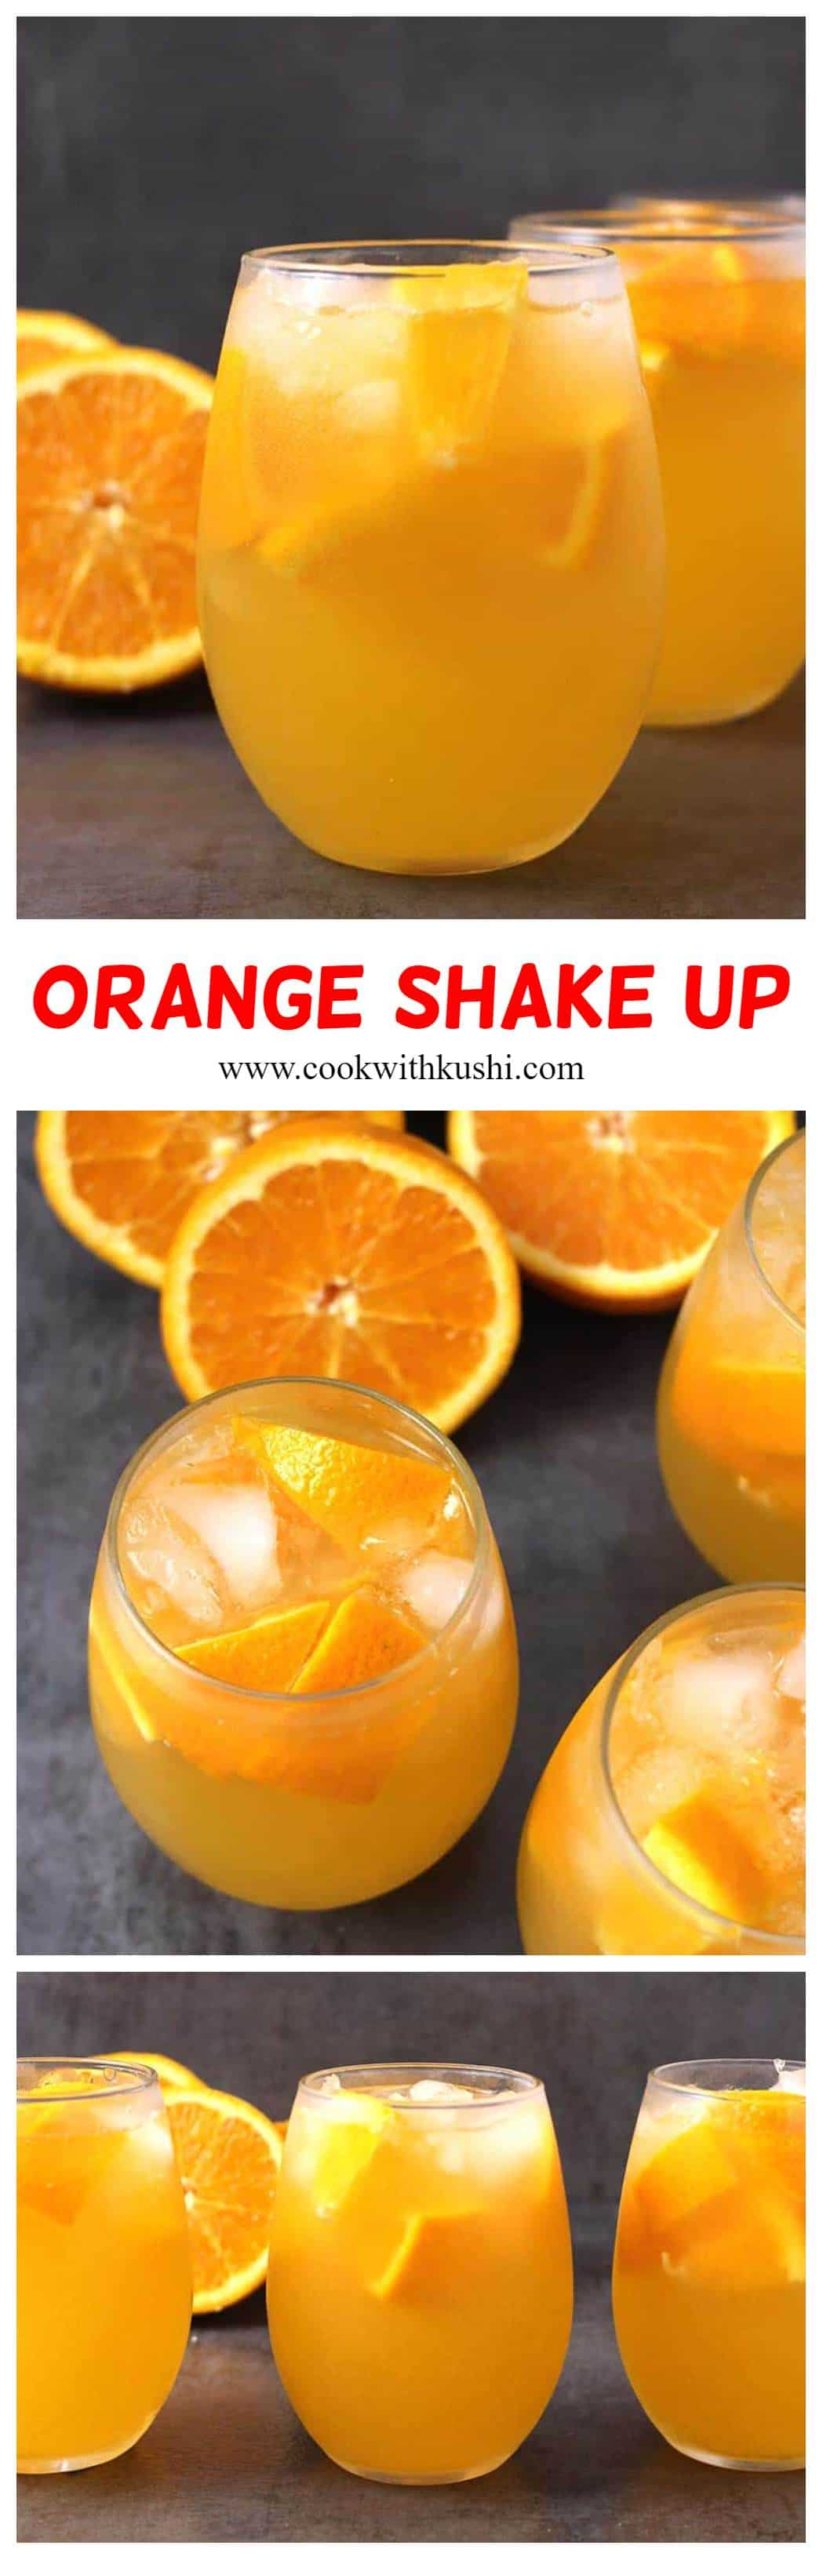 Orange Shake Up is one of the best thirst quenching and refreshing, easy to make drink that requires just 3 ingredients to prepare #carnivalfood #statefairfood #nonalcoholicdrink #drinkrecipes #lemonaderecipes